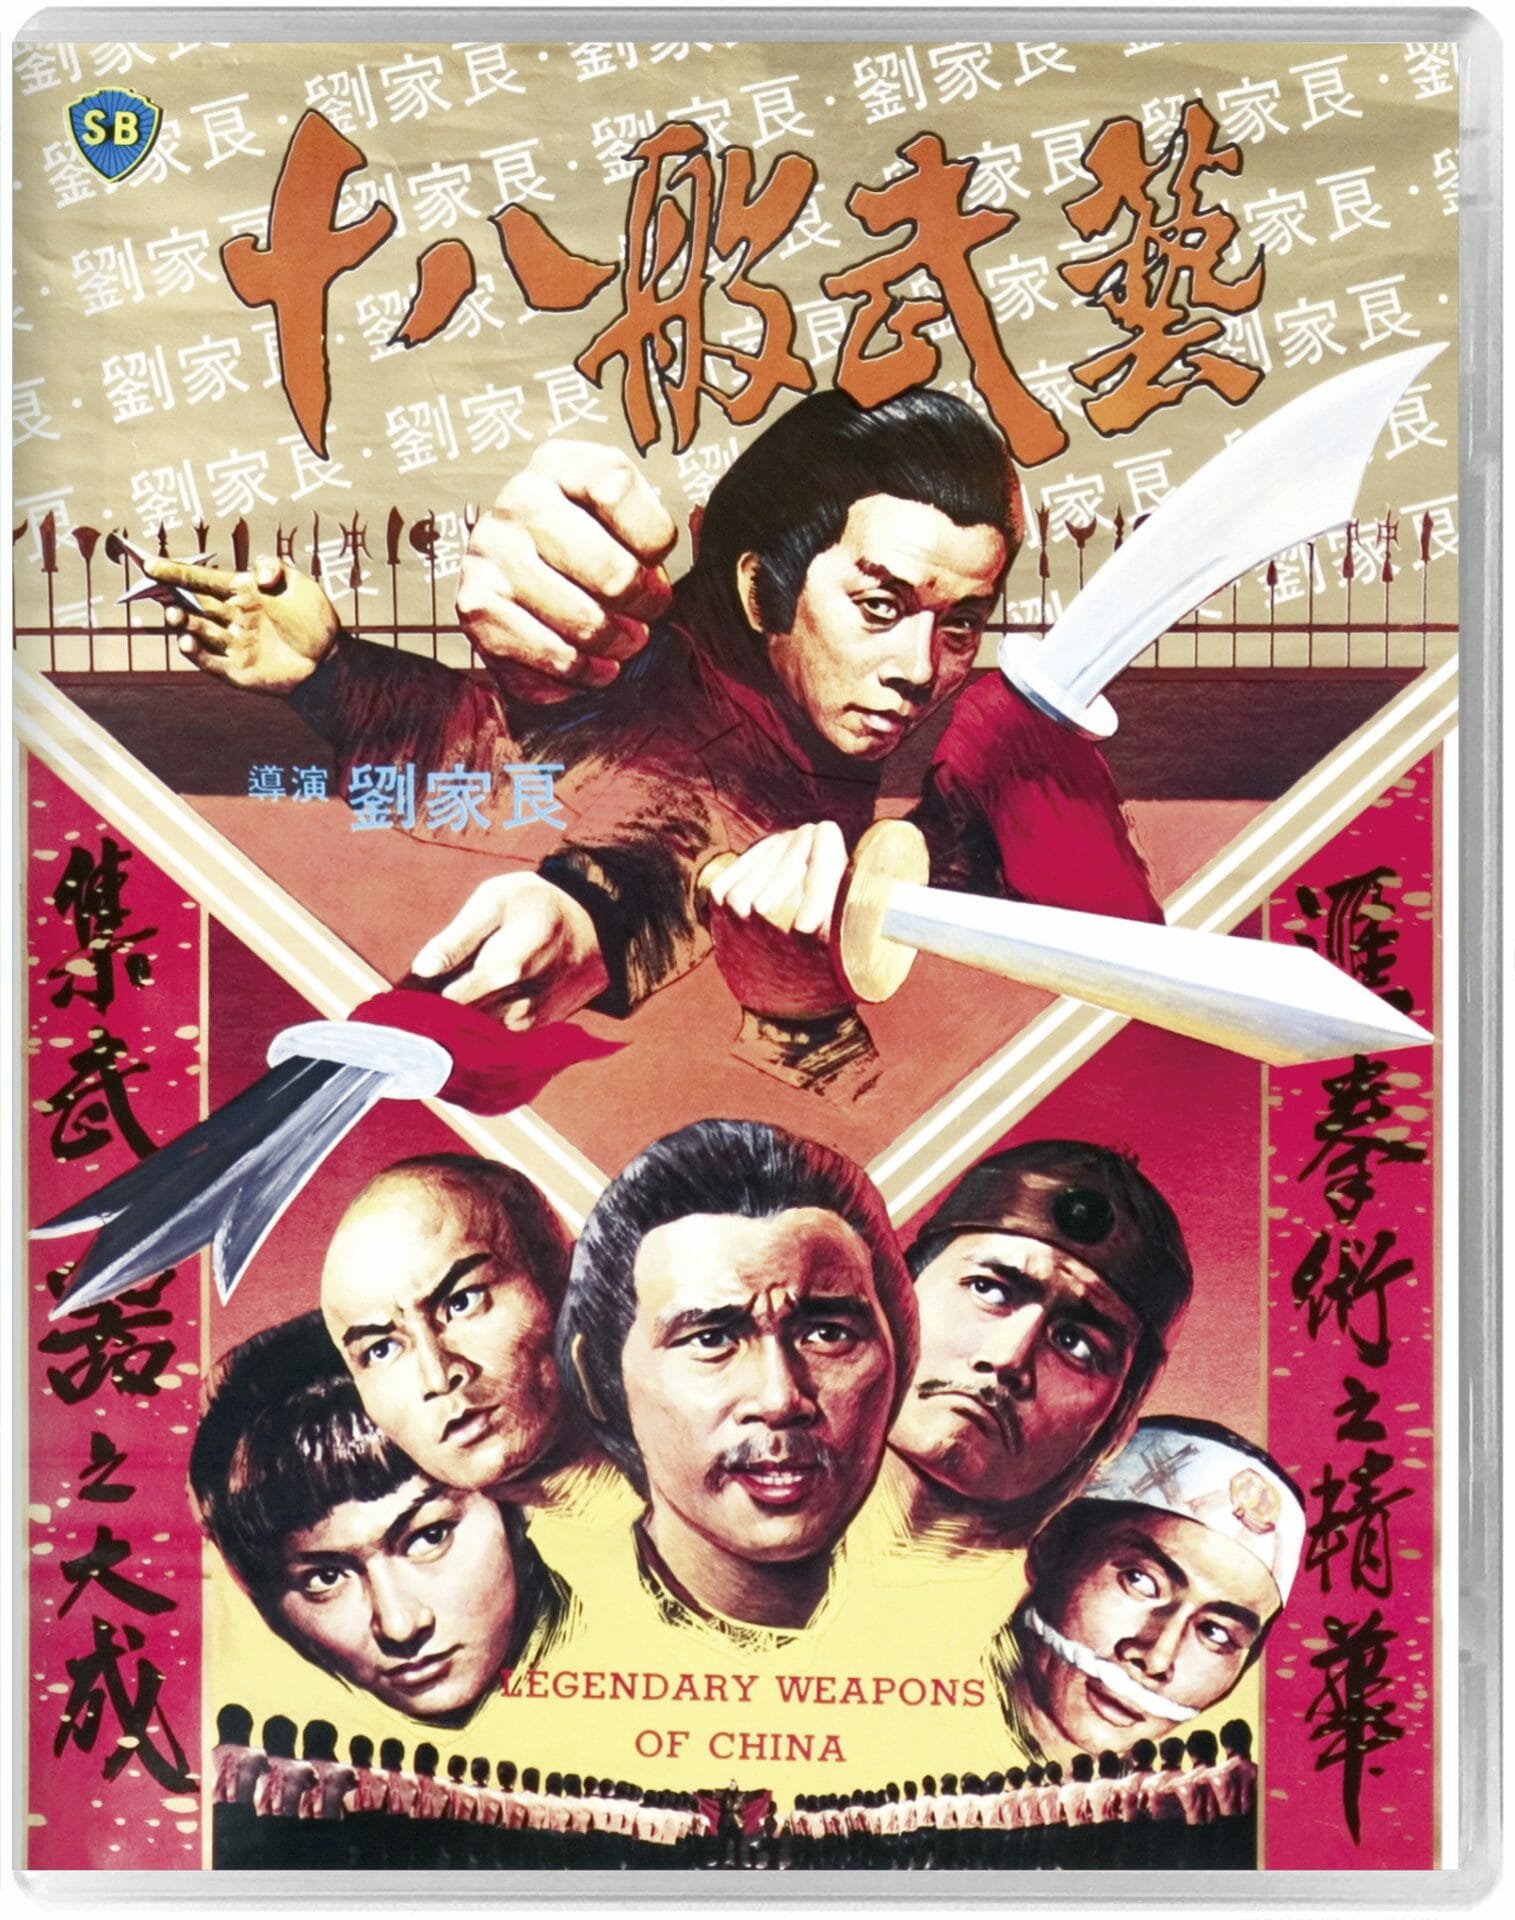 Legendary Weapons of China (US 88 Films Release) (Blu-Ray)